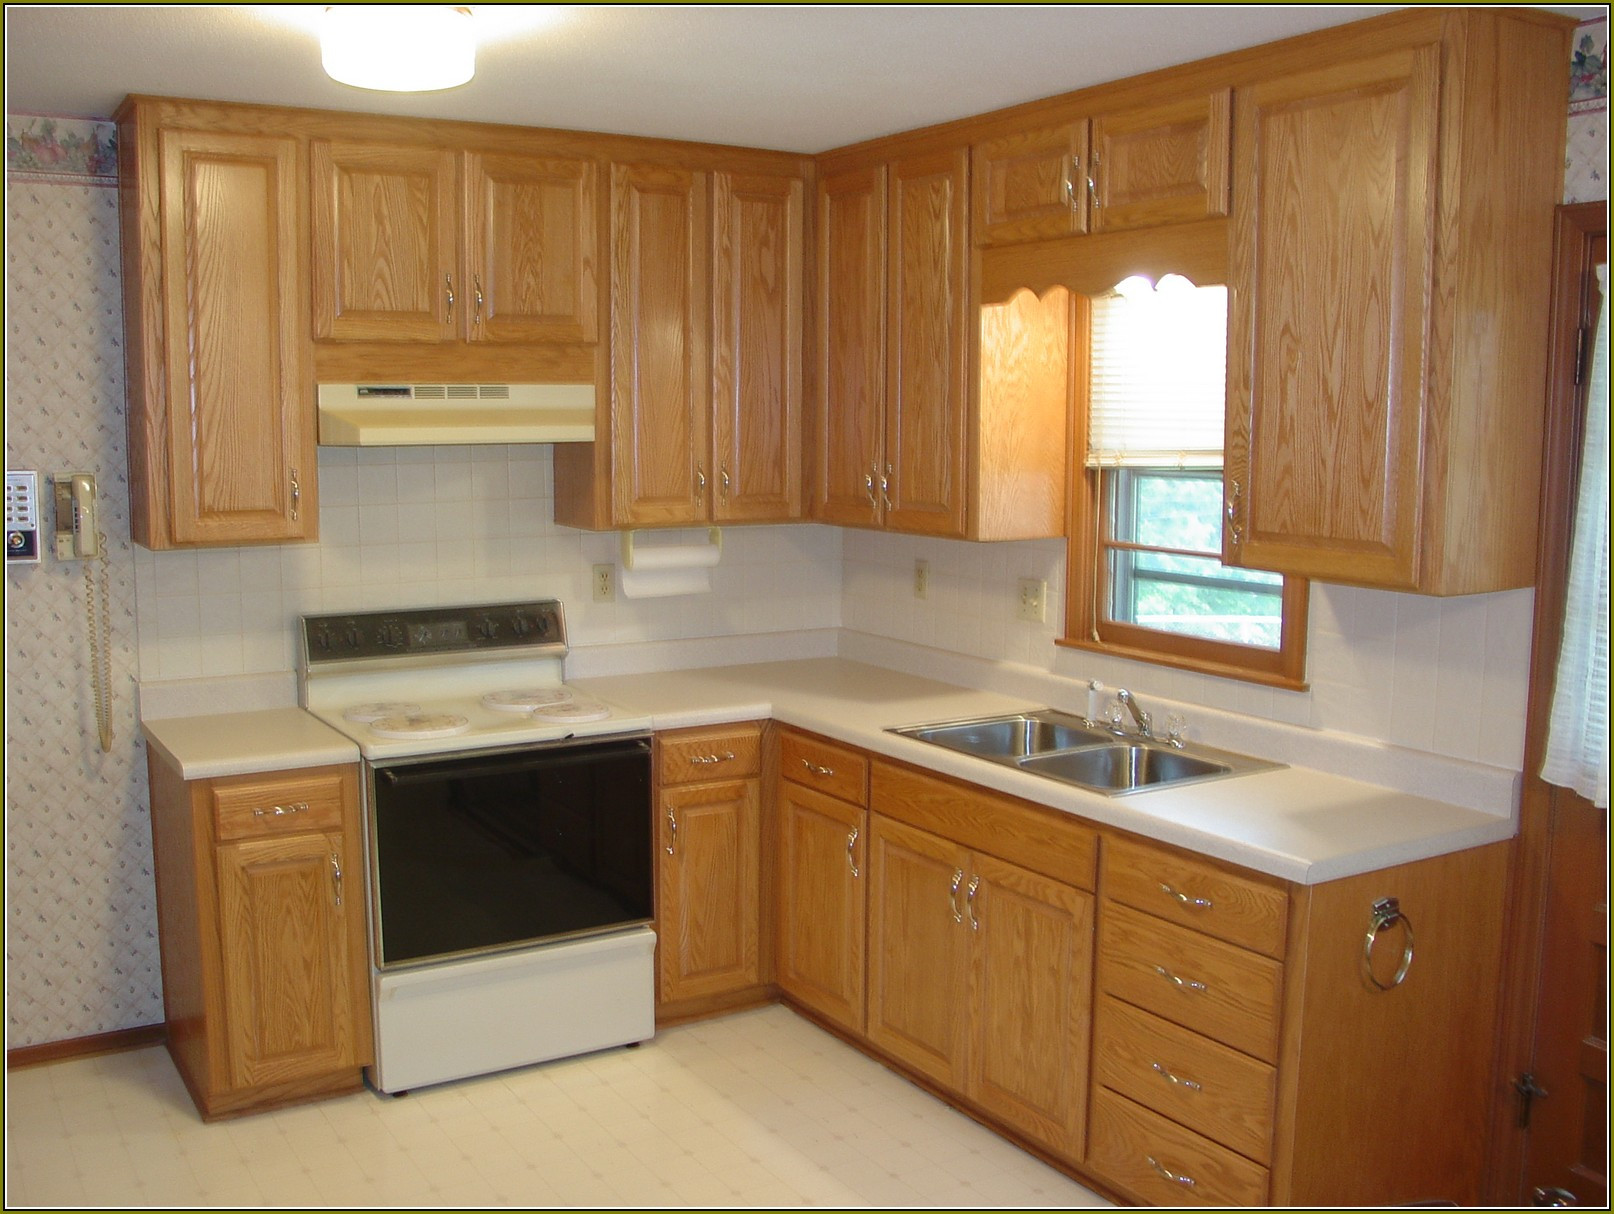 Lowes Unfinished Kitchen Cabinets Fresh Kitchen Make Your Kitchen Look Perfect With Kraftmaid Of Lowes Unfinished Kitchen Cabinets 